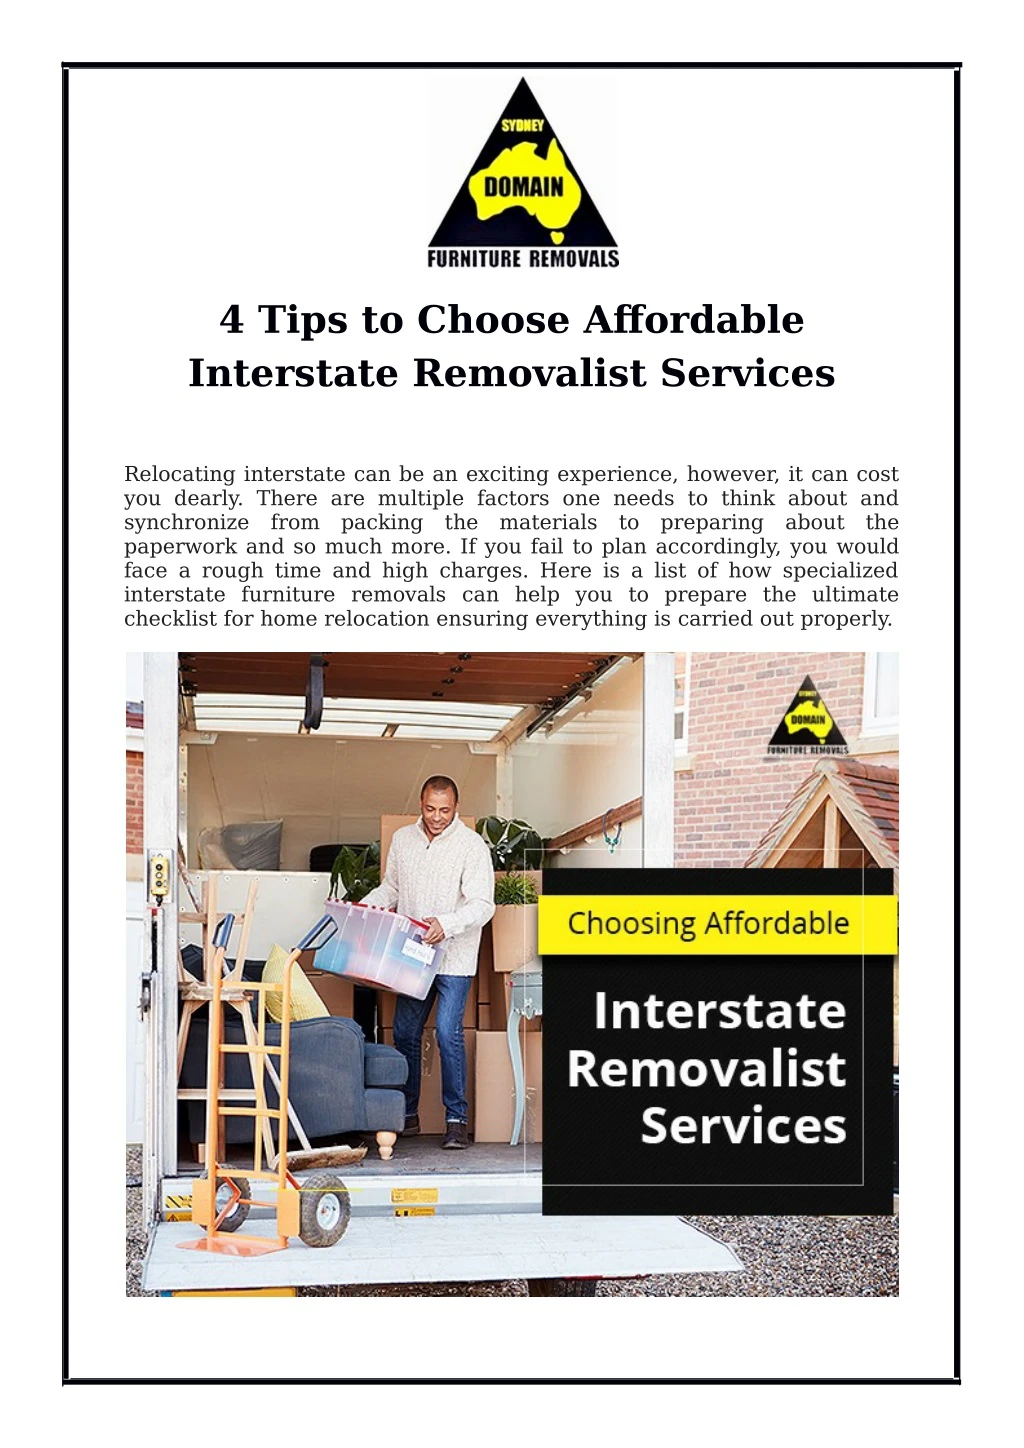 4 tips to choose affordable interstate removalist